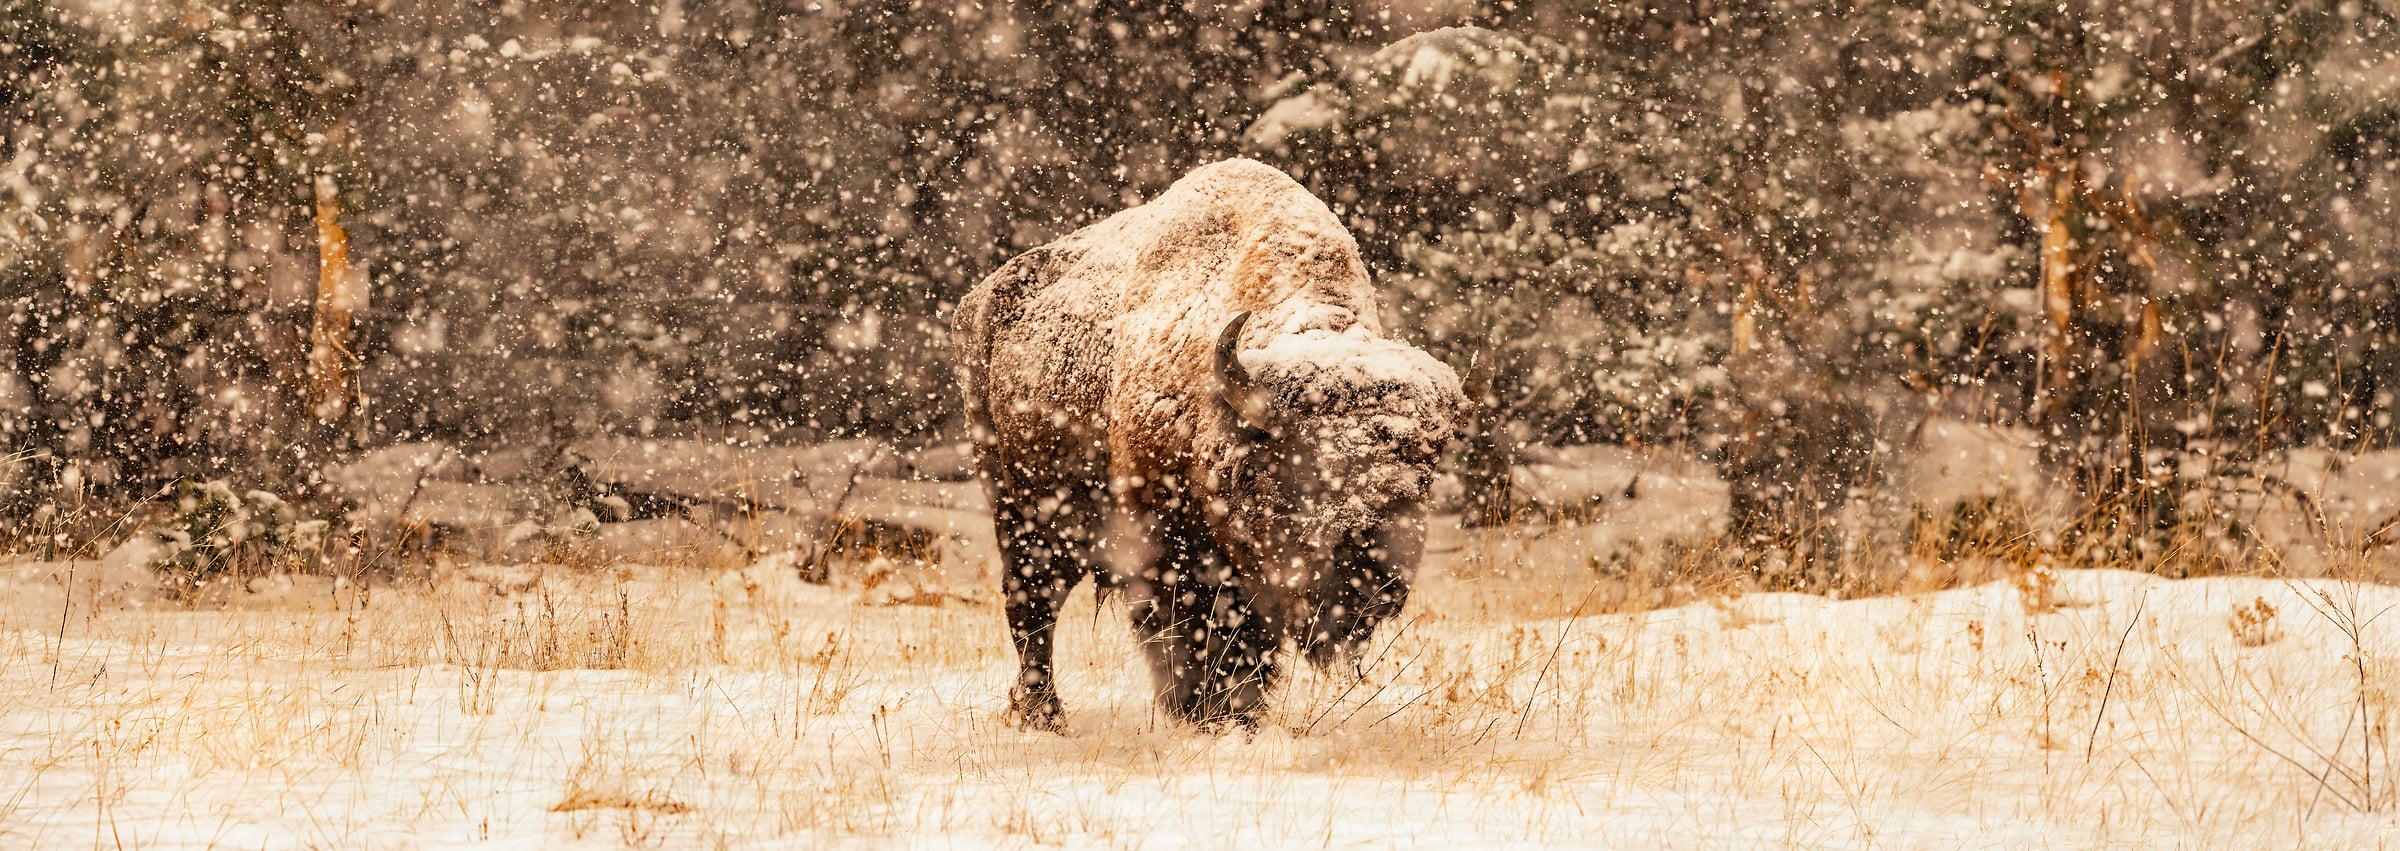 276 megapixels! A very high resolution, large-format VAST photo print of a bison in the snow; wildlife photograph created by David David in Yellowstone National Park, Wyoming.